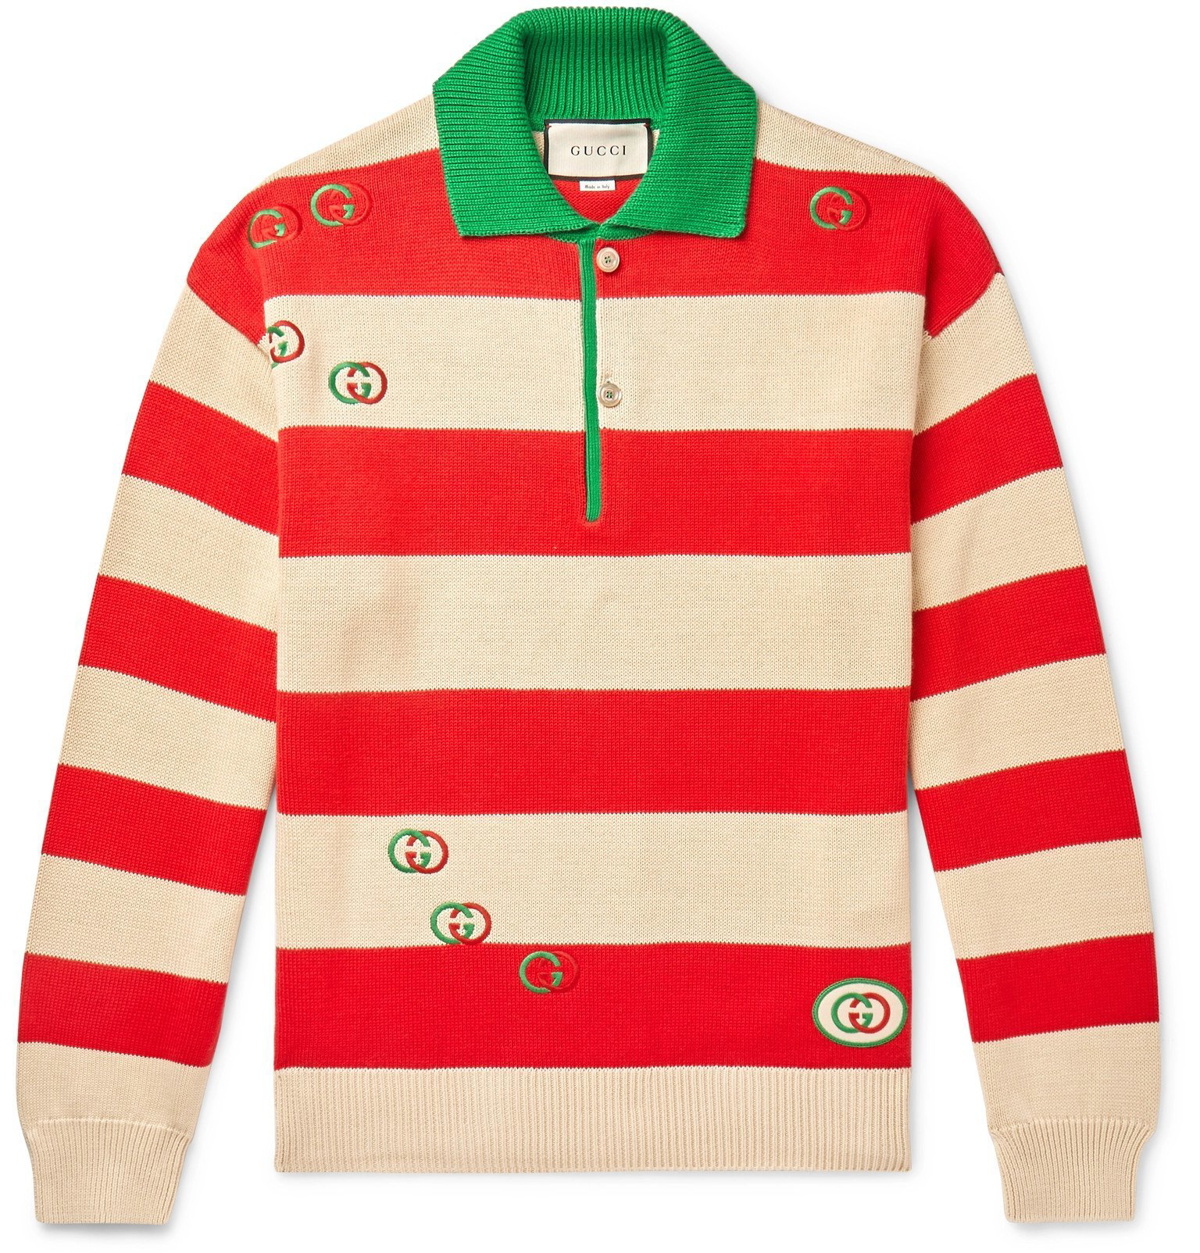 Gucci - Logo-Embroidered Half-Placket Sweater - Red Gucci